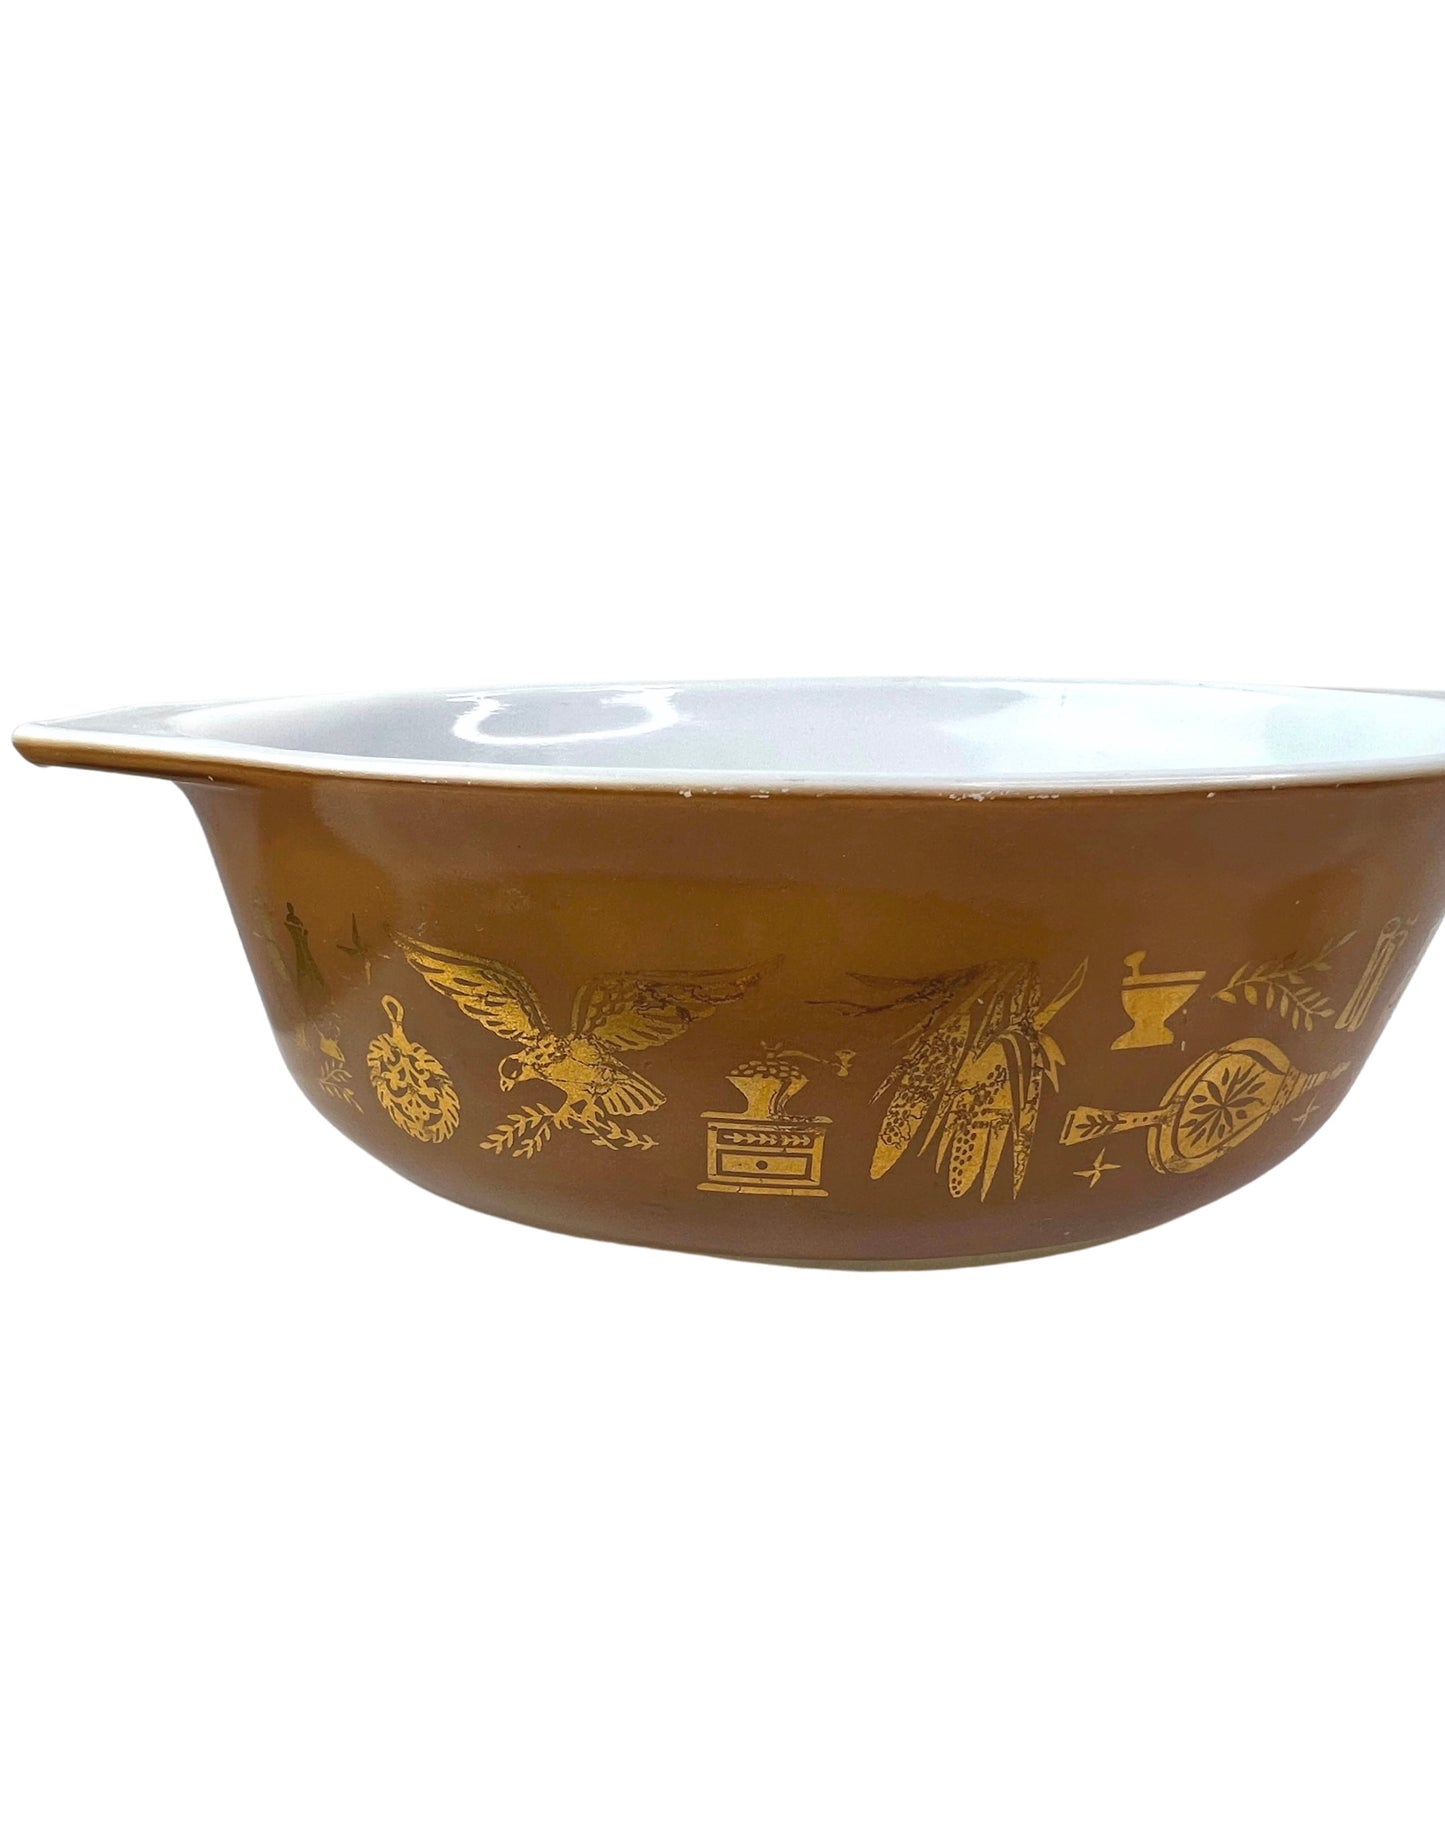 60’s Pyrex Early American Brown & Gold 1.5Q Cinderella Casserole Dish